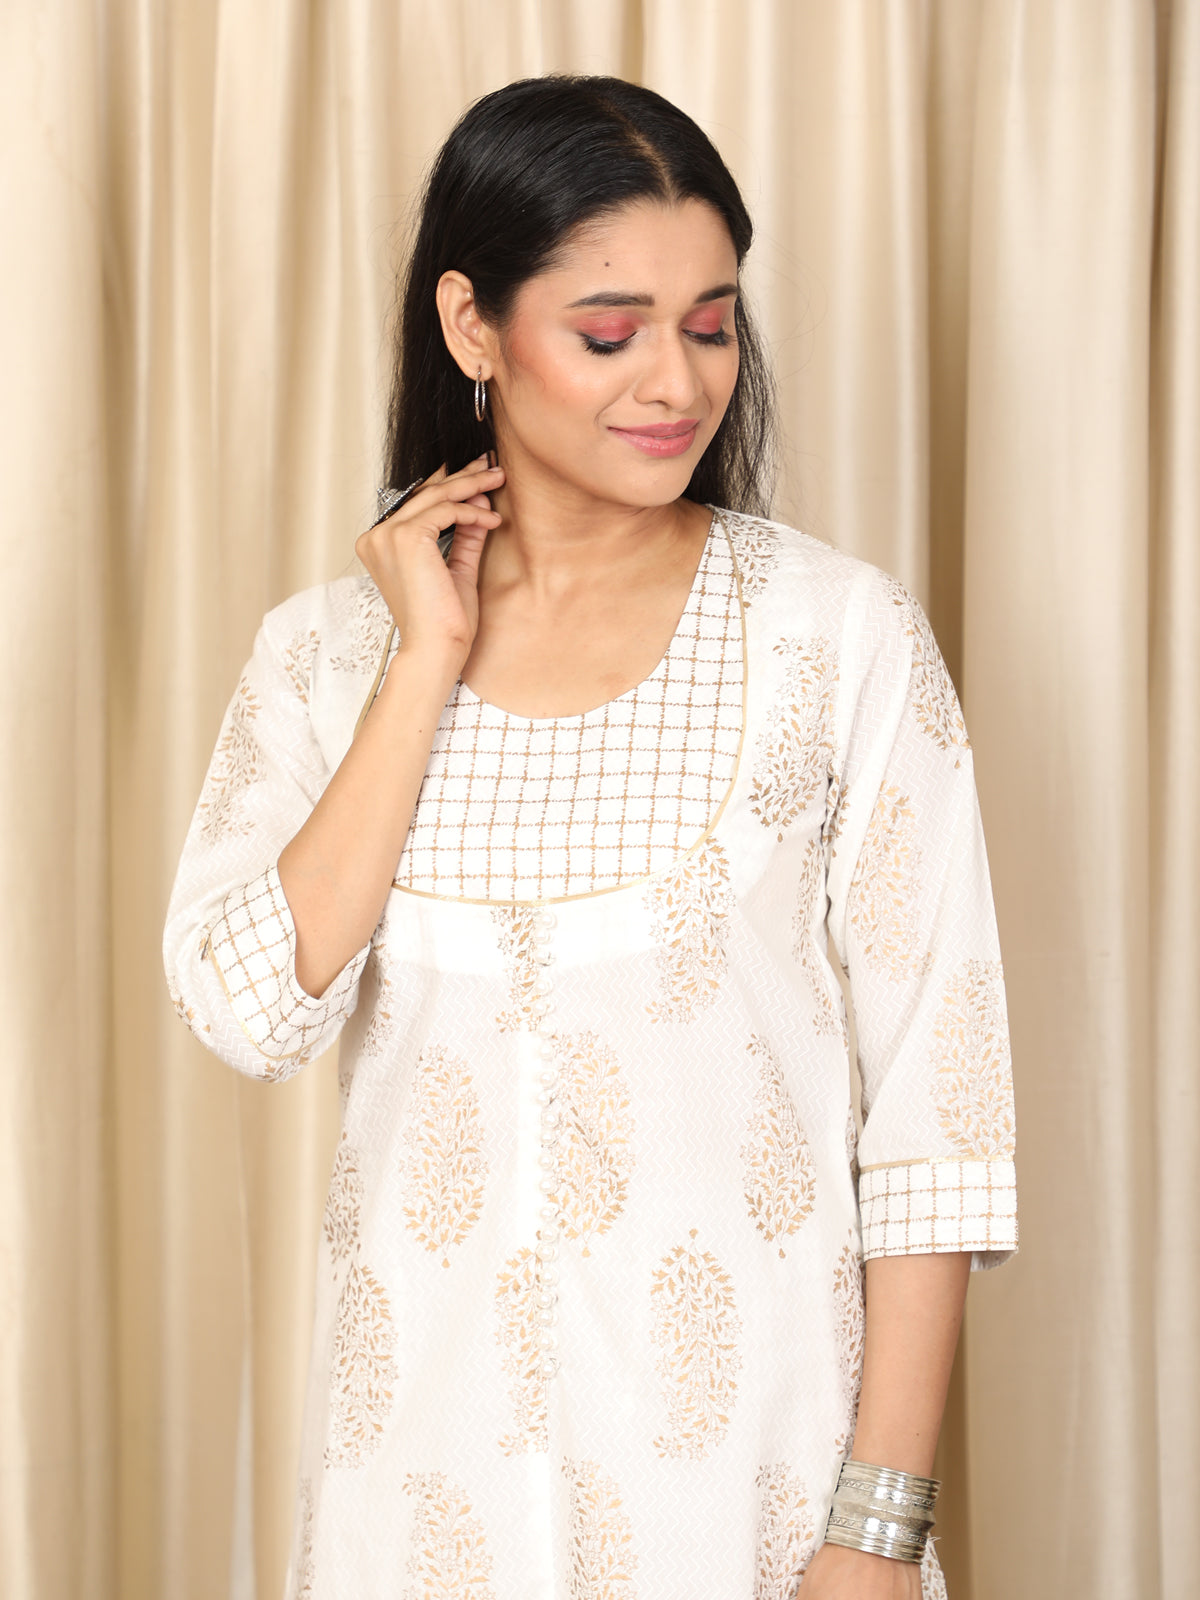 Regal Gold on White Party Wear A-line Kurti UCKL22015